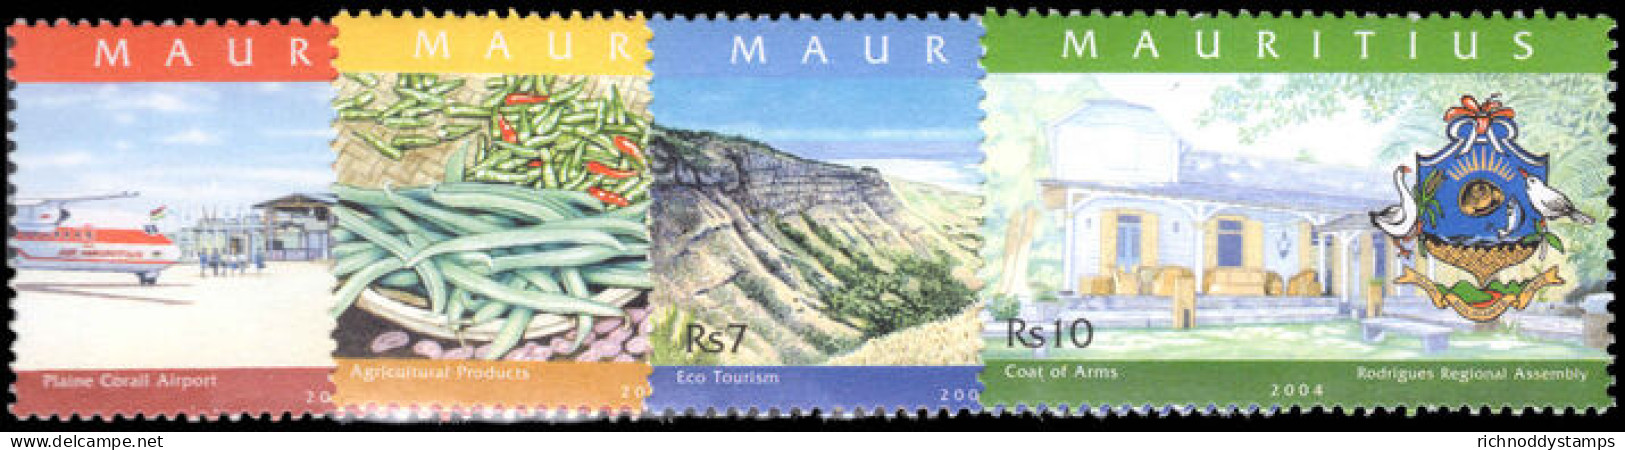 Mauritius 2004 Rodrigues Regional Assembly Unmounted Mint. - Mauritius (1968-...)